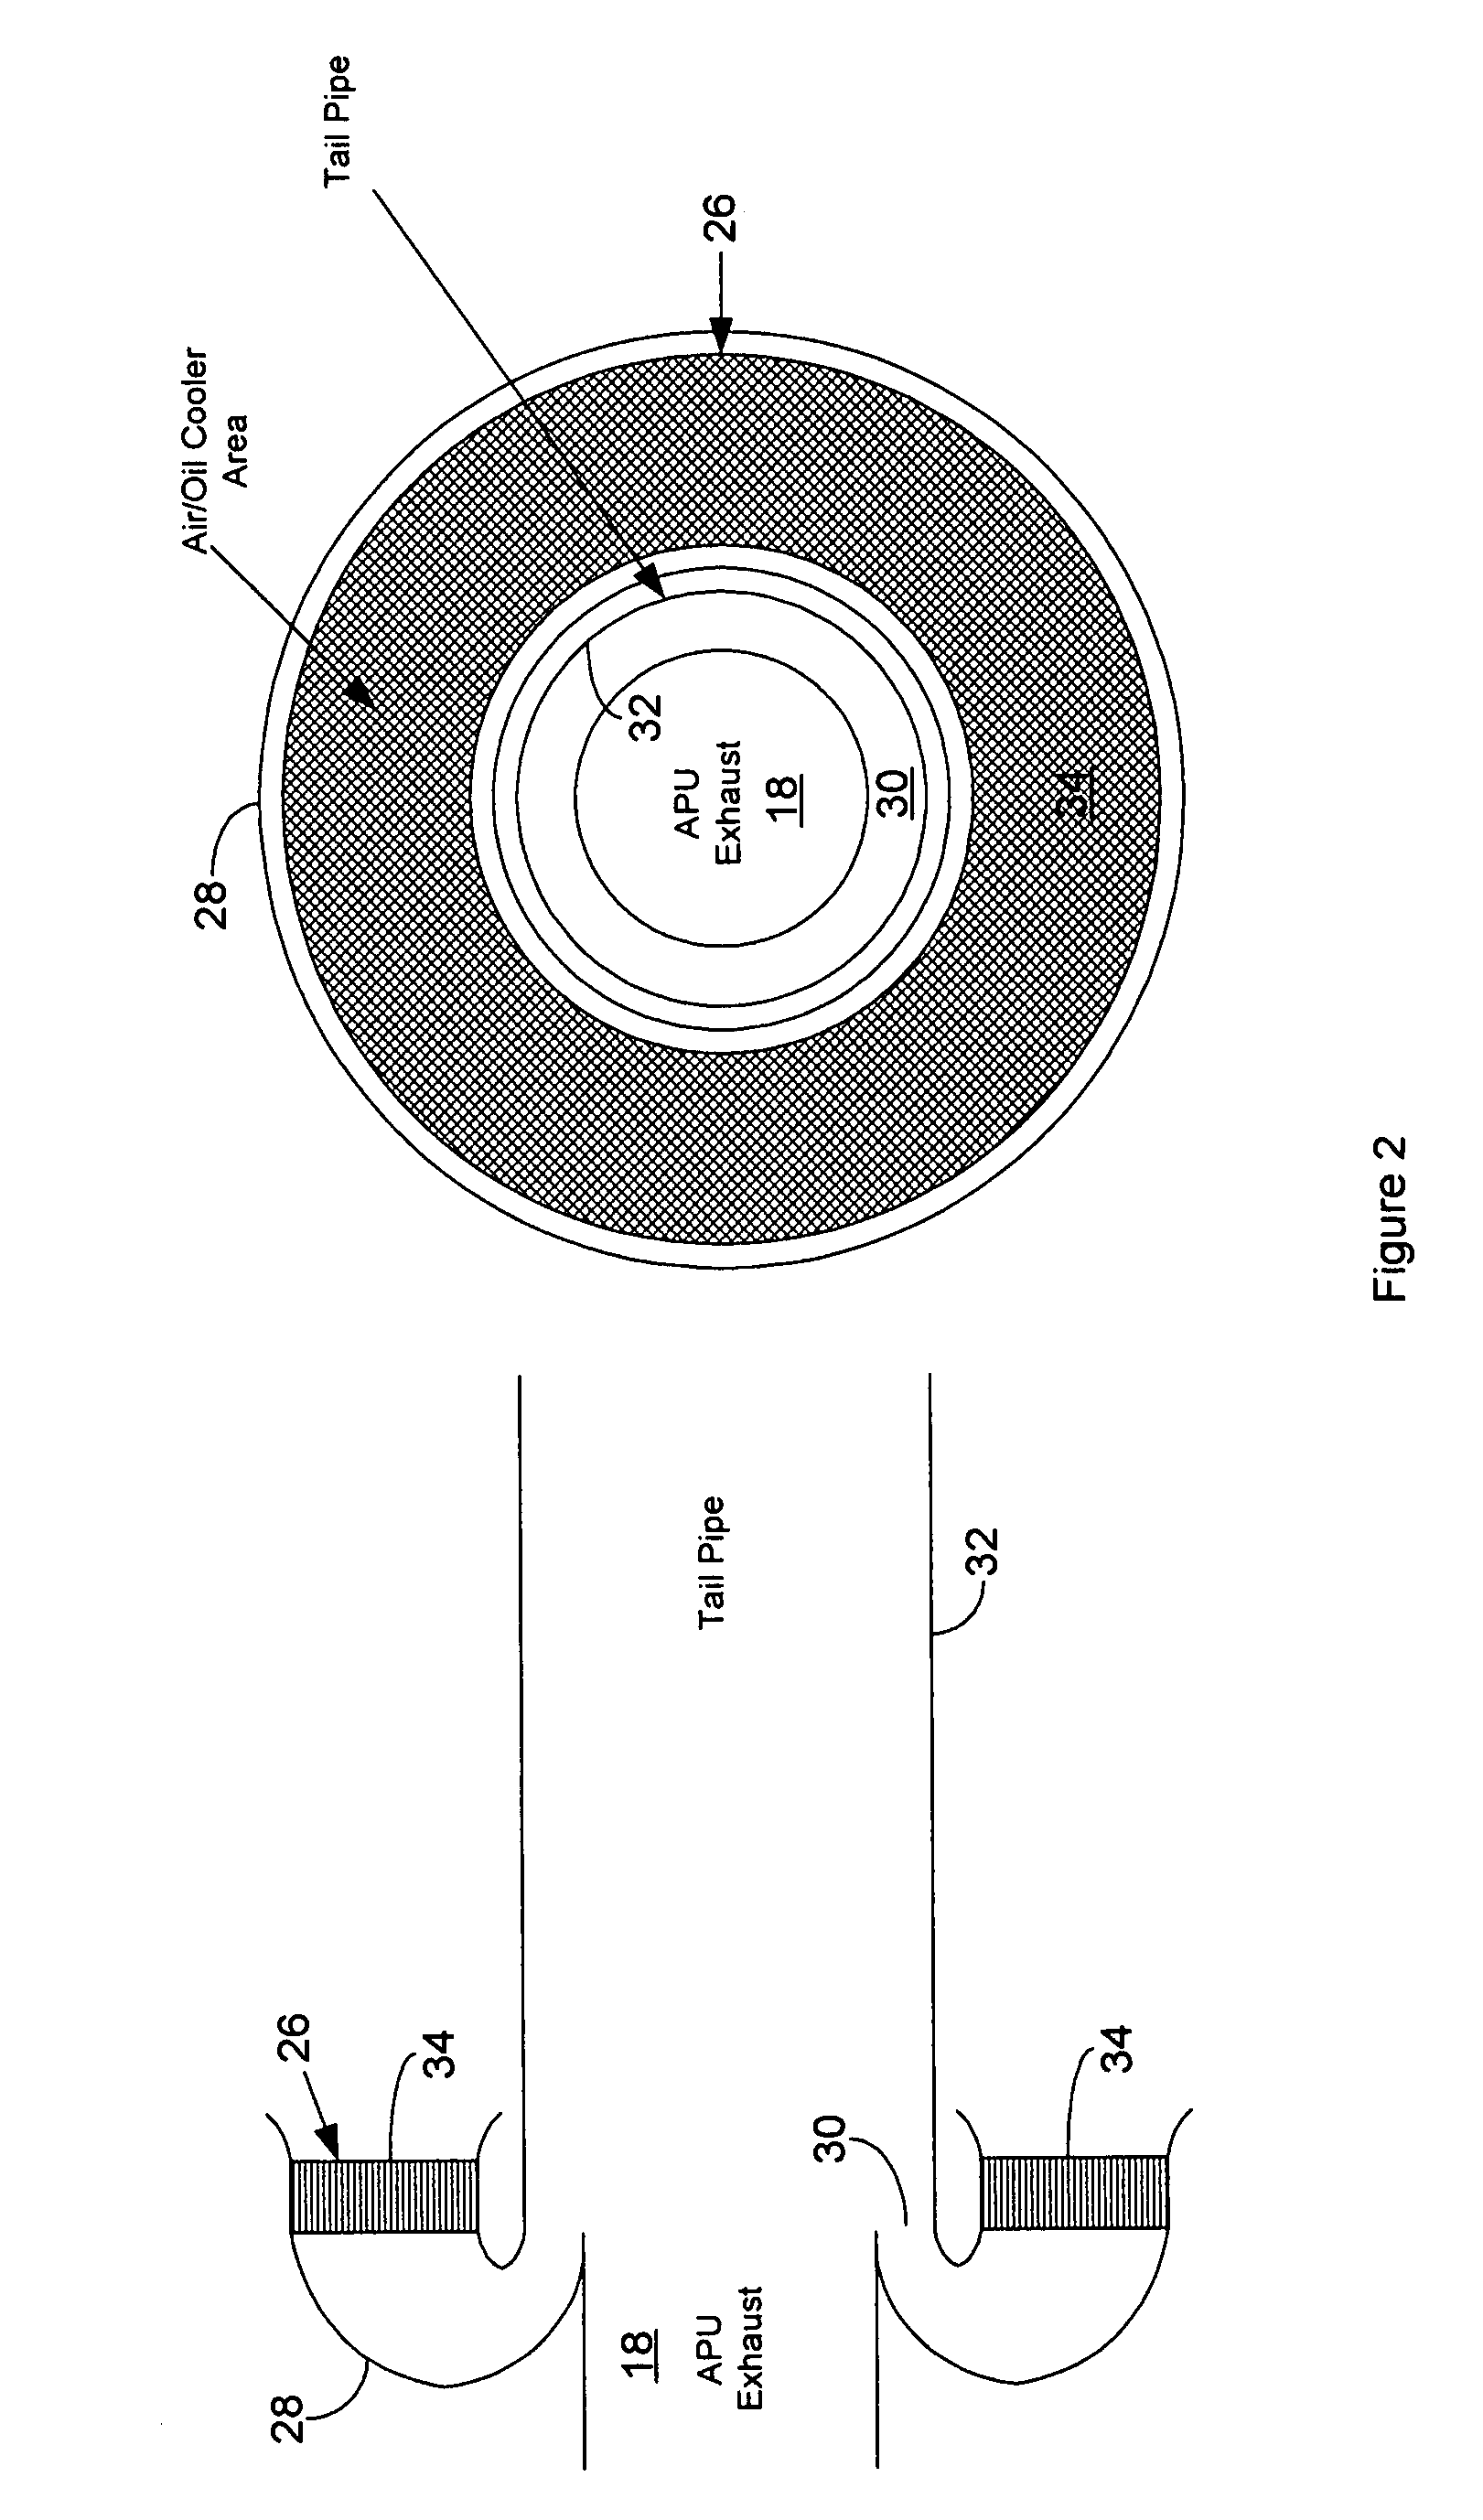 Thermal management for aircraft auxiliary power unit compartment